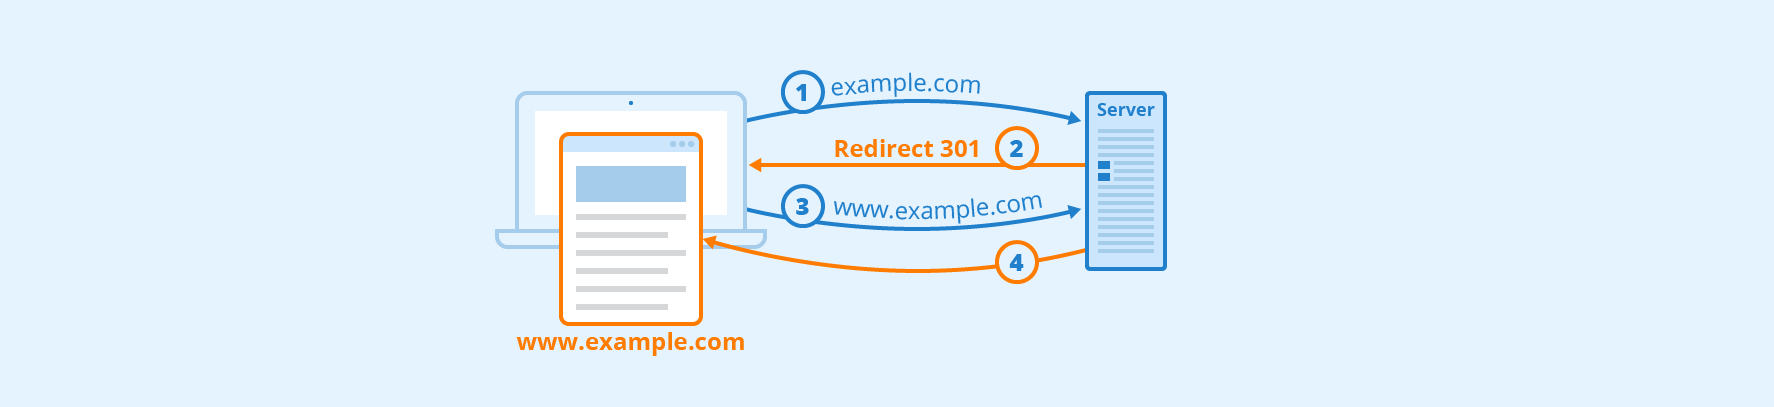 A diagram of how redirects work